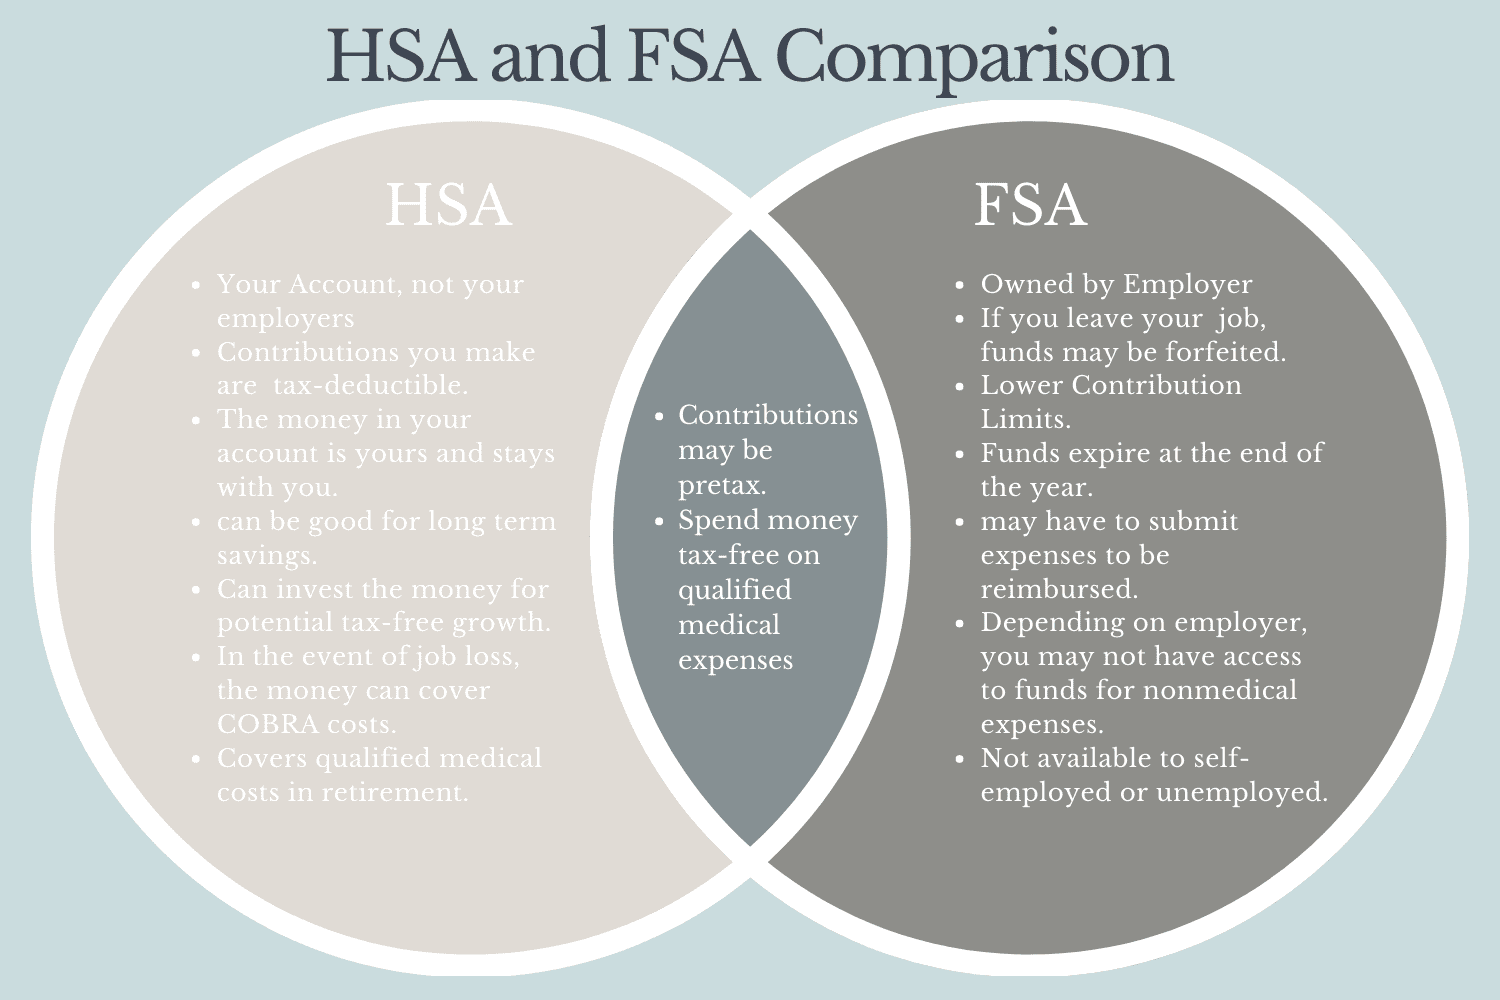 Employee Benefits Edition: HSA and FSA Explained - Providence